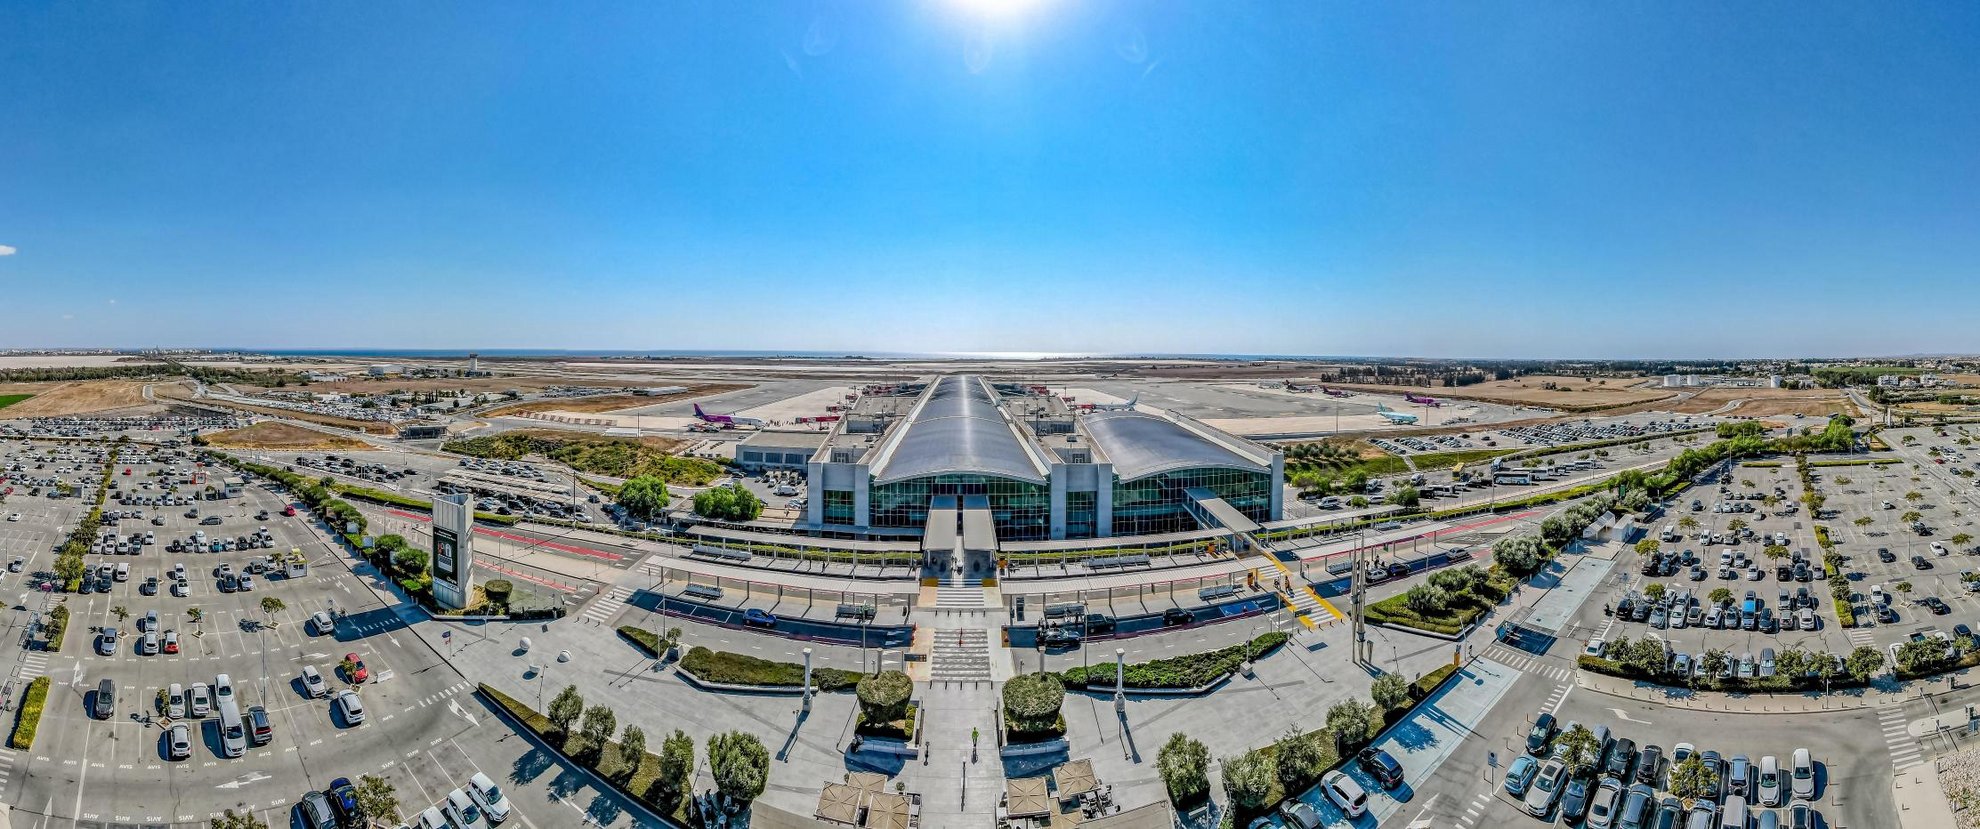 image Cyprus airports welcome close to 5 million passengers — tourism recovery ongoing